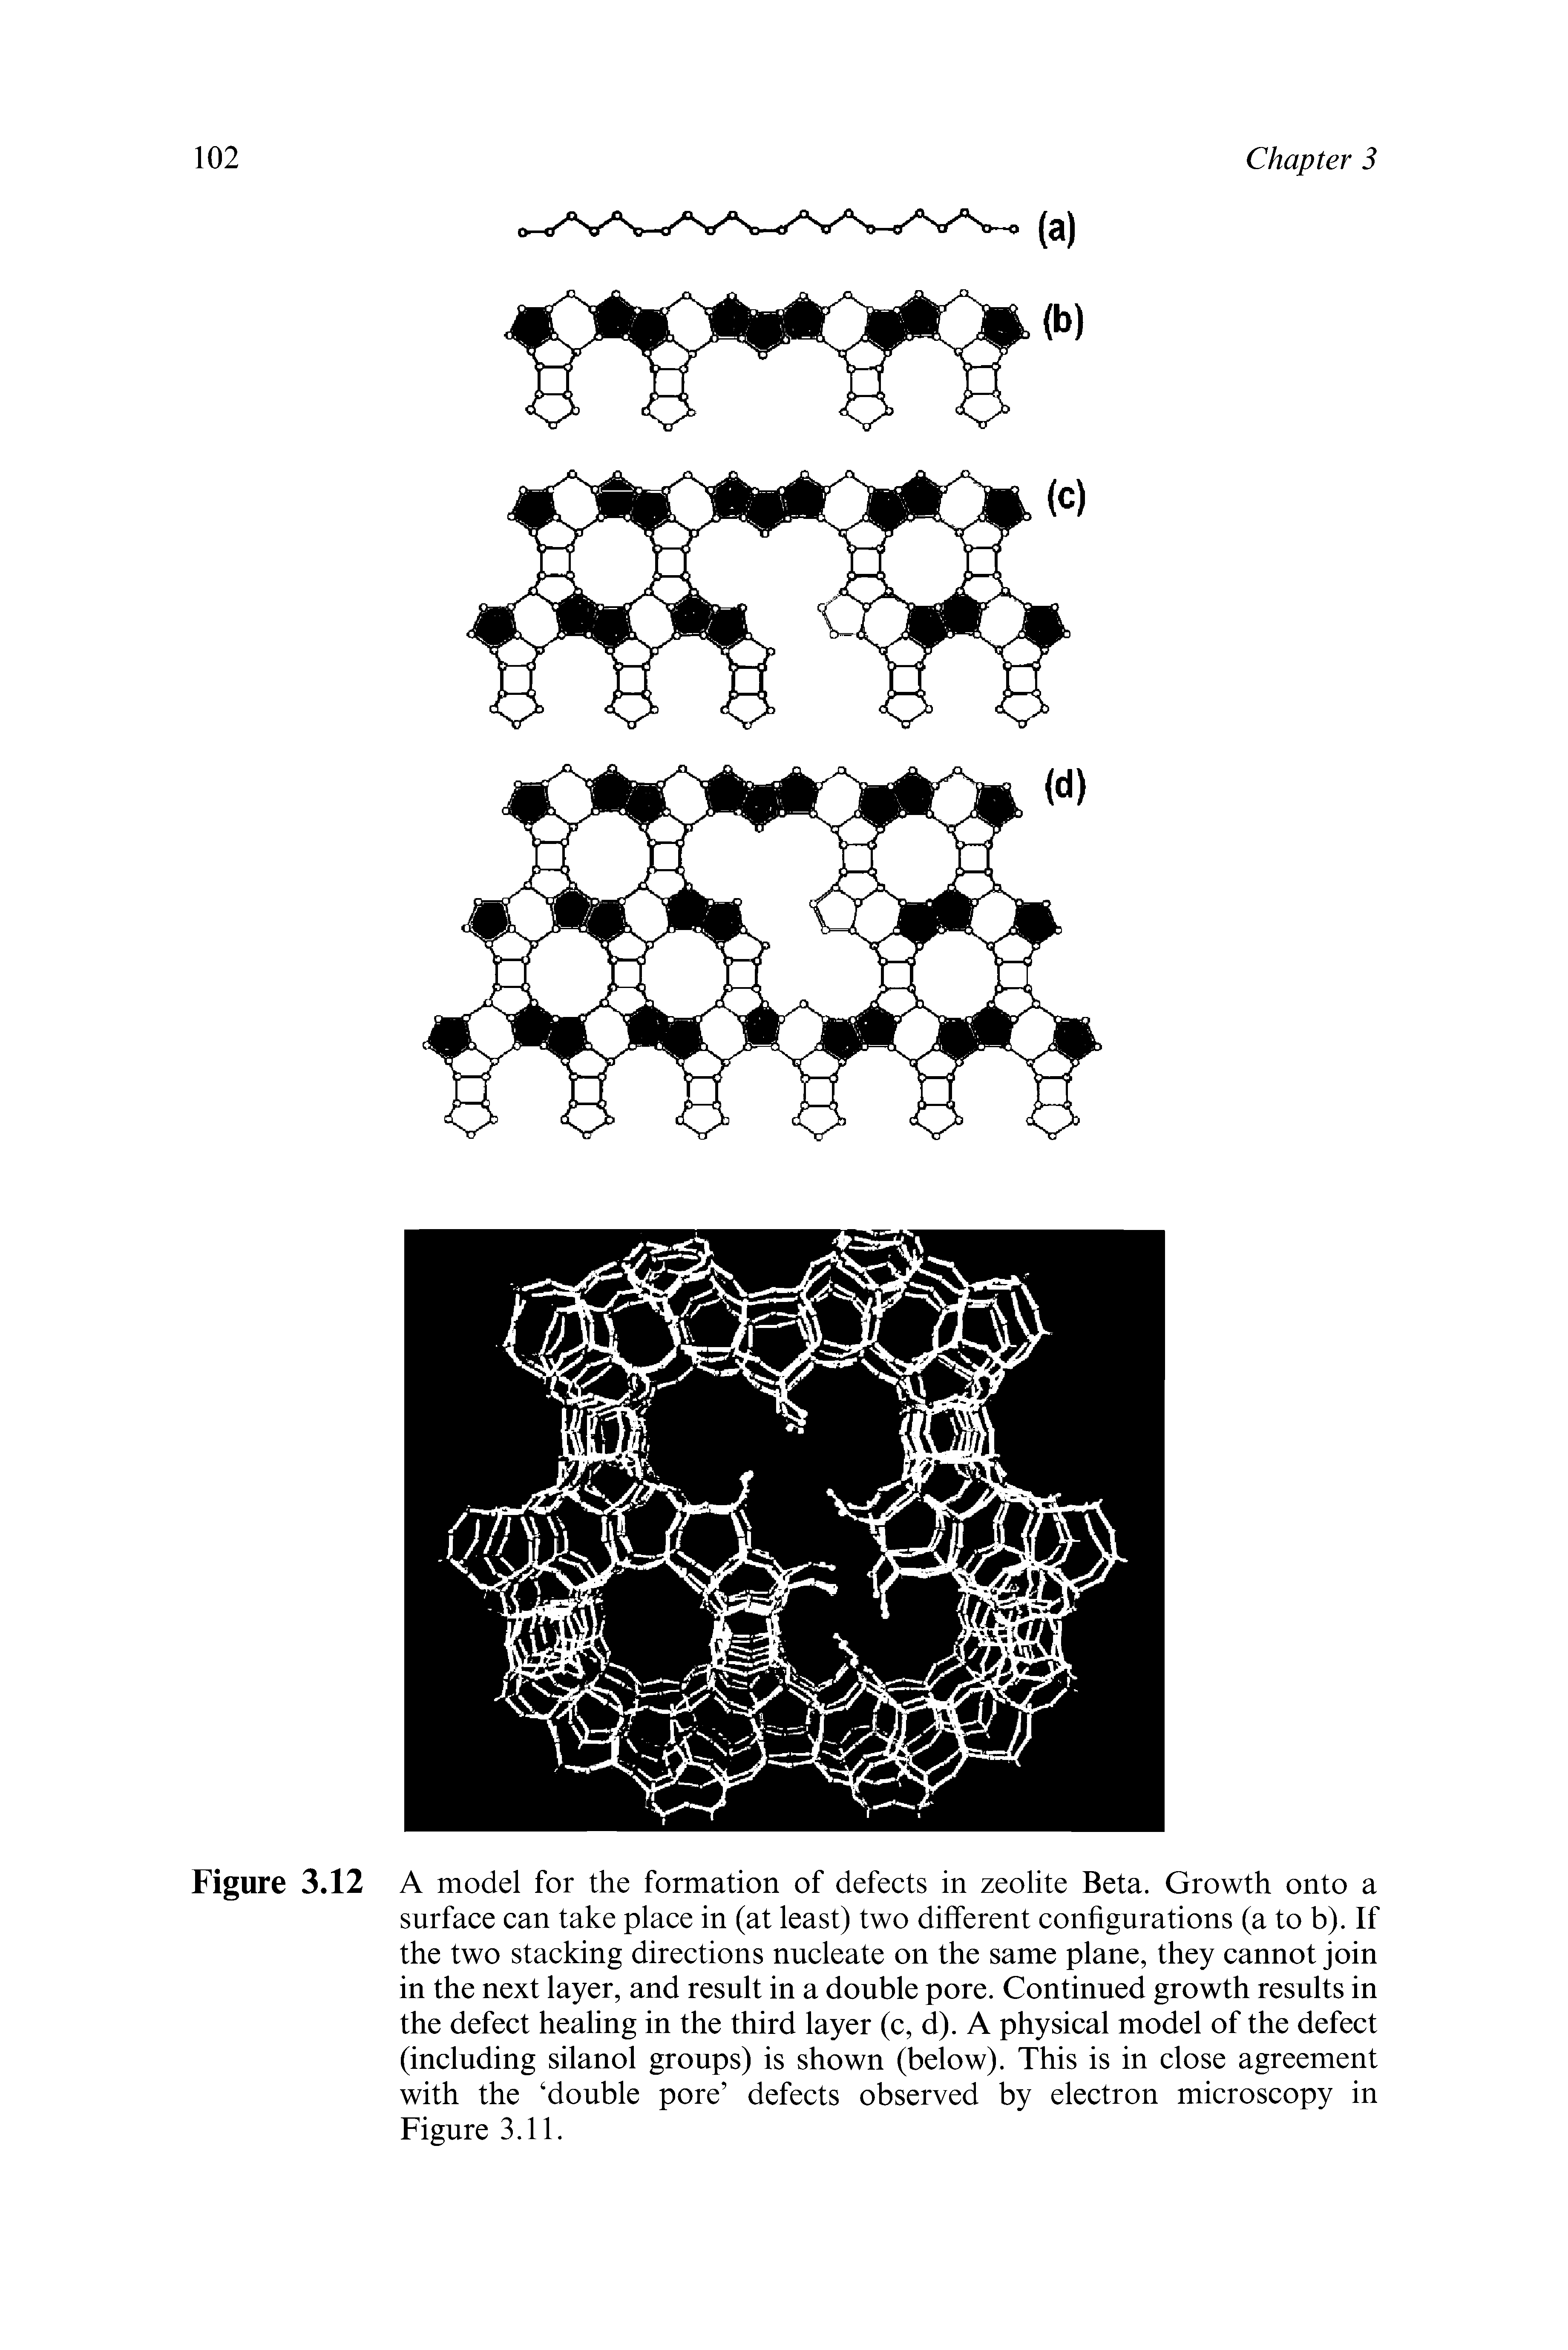 Figure 3.12 A model for the formation of defects in zeolite Beta. Growth onto a surface can take place in (at least) two different configurations (a to b). If the two stacking directions nucleate on the same plane, they cannot join in the next layer, and result in a double pore. Continued growth results in the defect healing in the third layer (c, d). A physical model of the defect (including silanol groups) is shown (below). This is in close agreement with the double pore defects observed by electron microscopy in Figure 3.11.